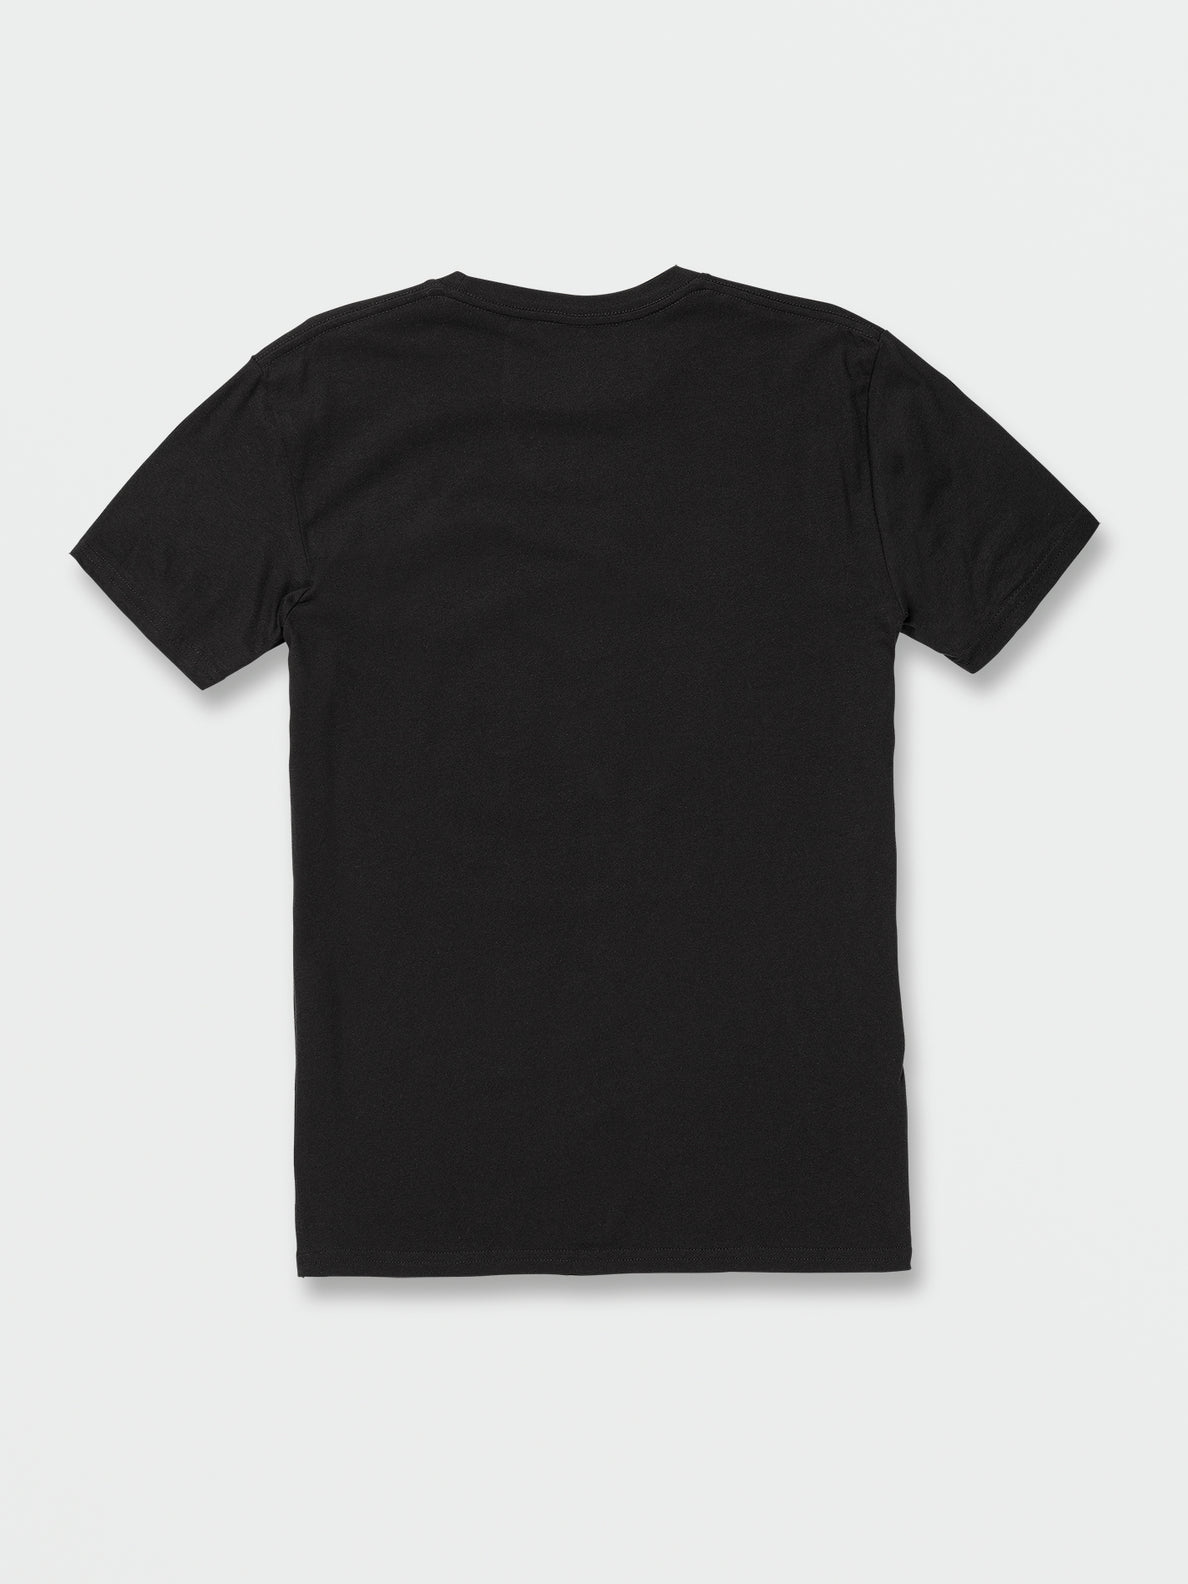 Within Short Sleeve Tee - Black (A3542203_BLK) [B]